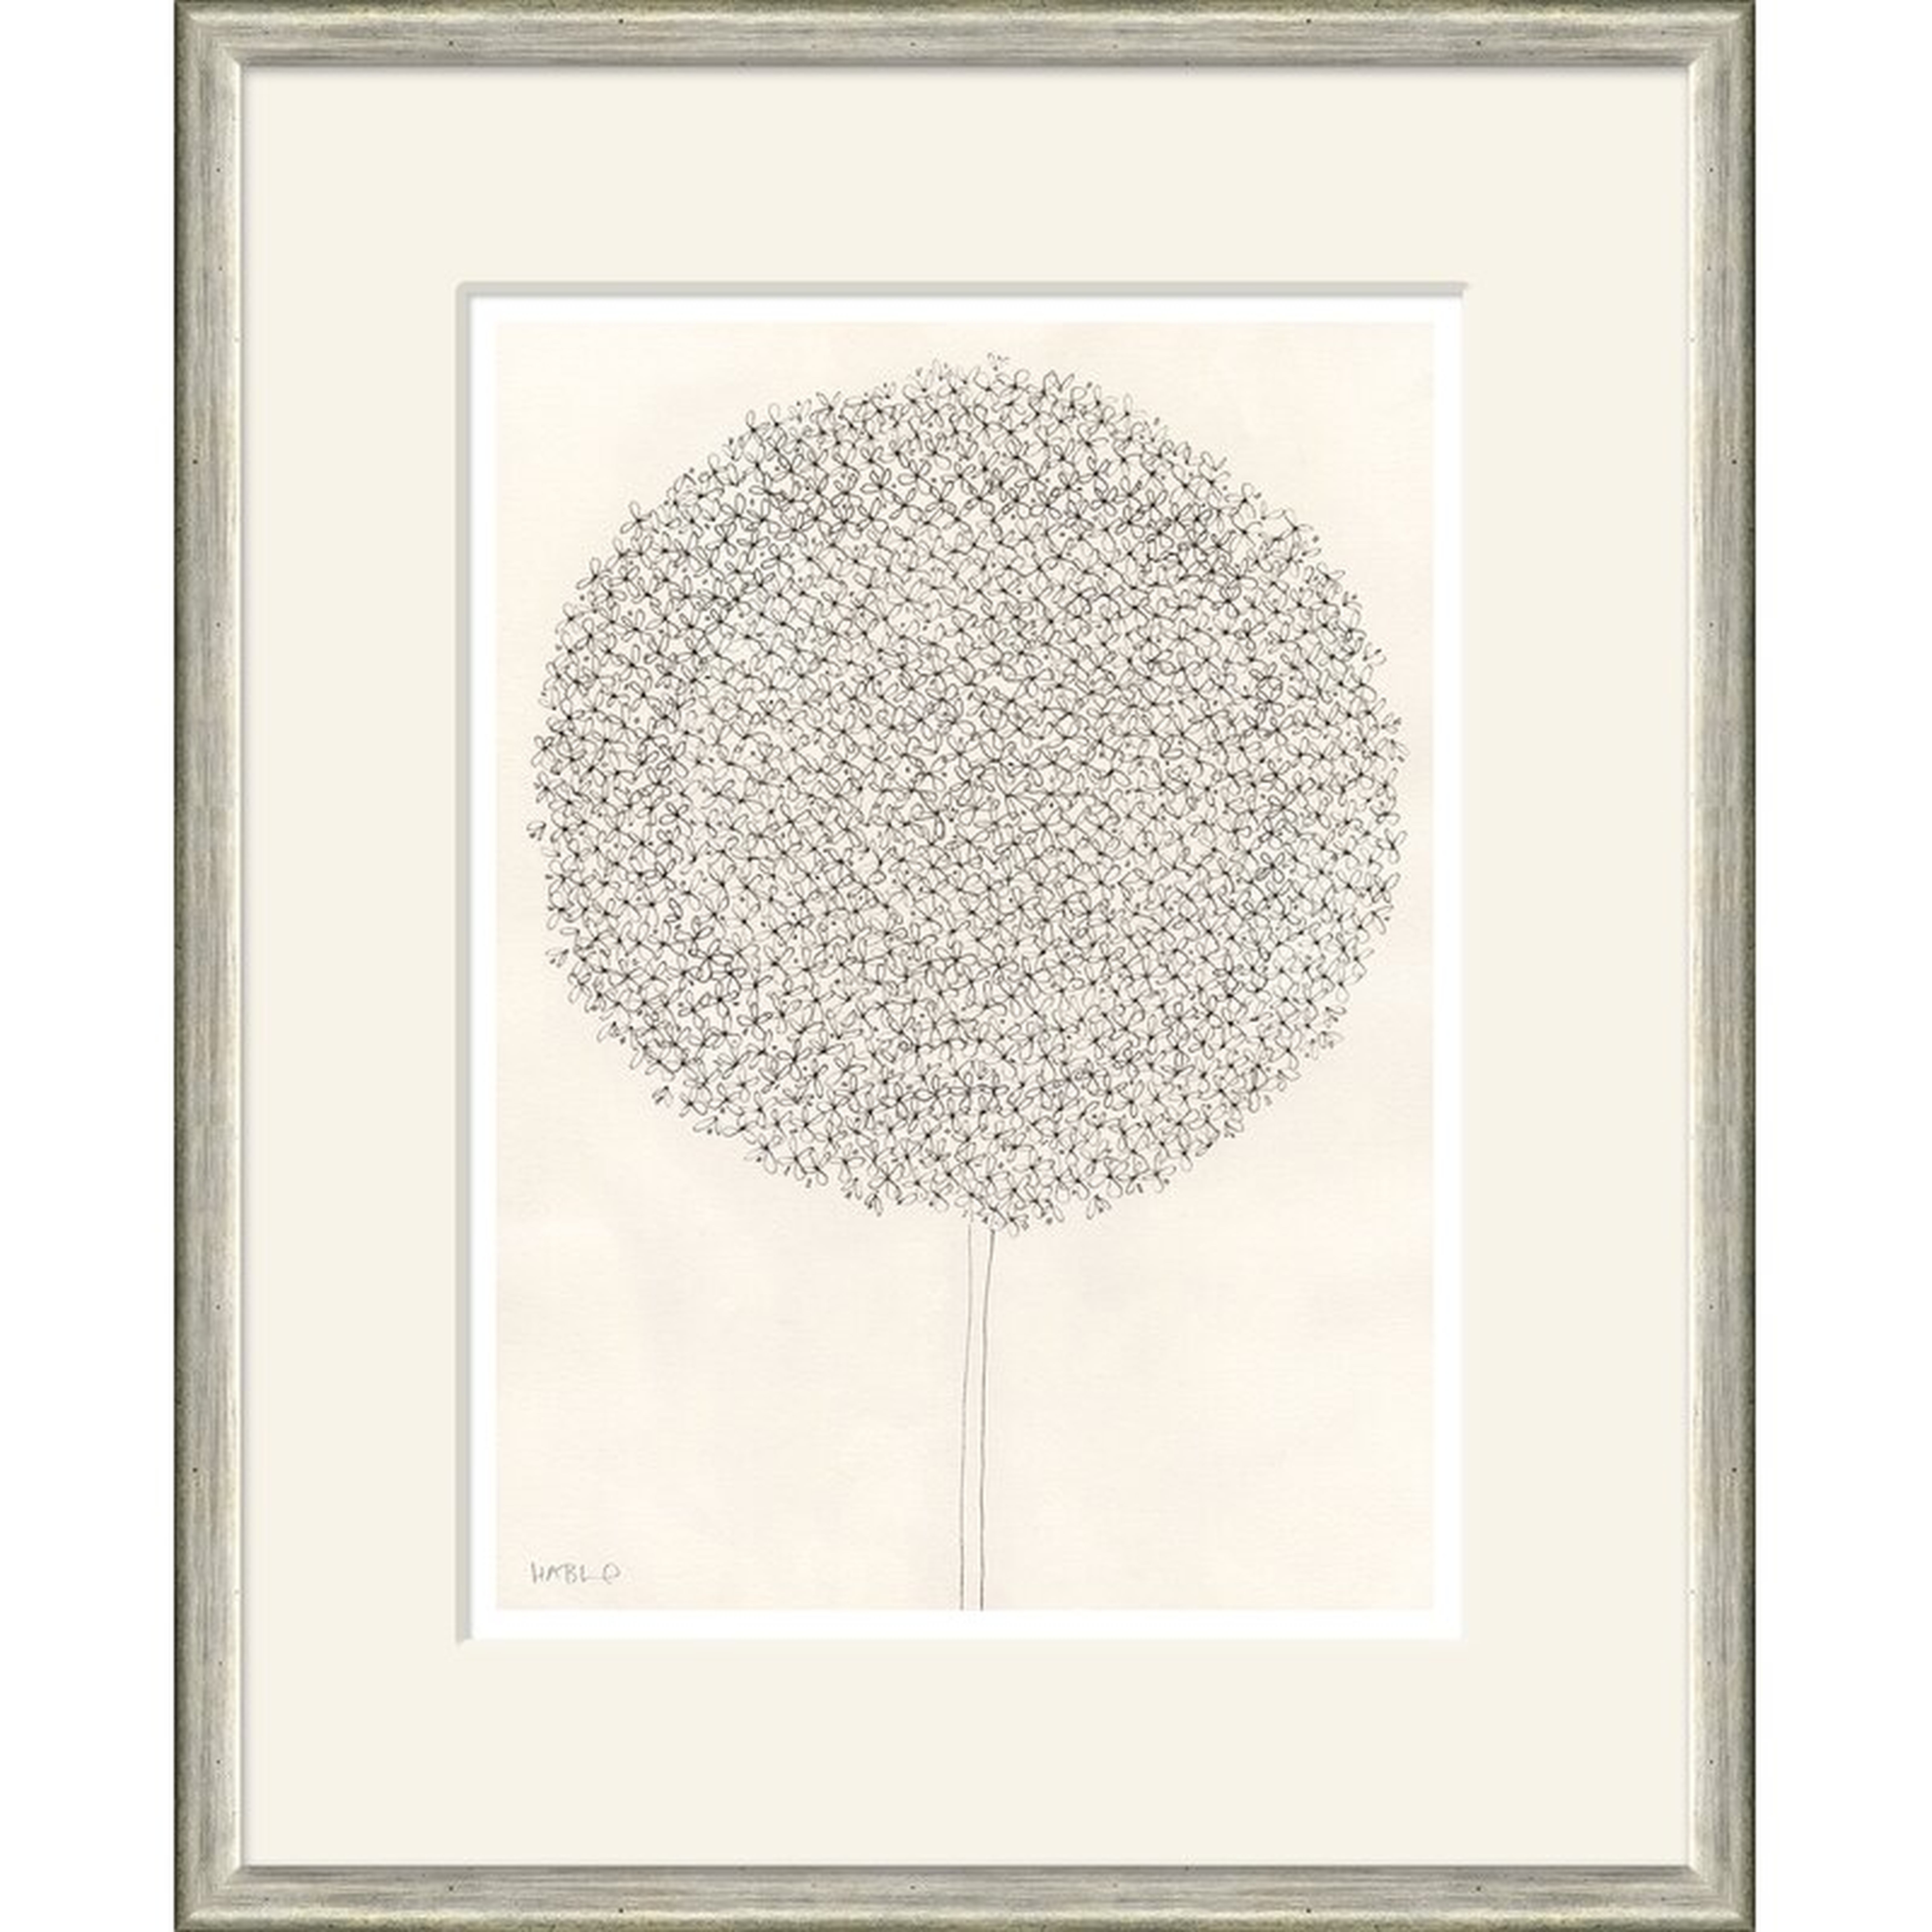 Soicher Marin Dandelion by Susan Hable - Picture Frame Painting Print on Paper - Perigold